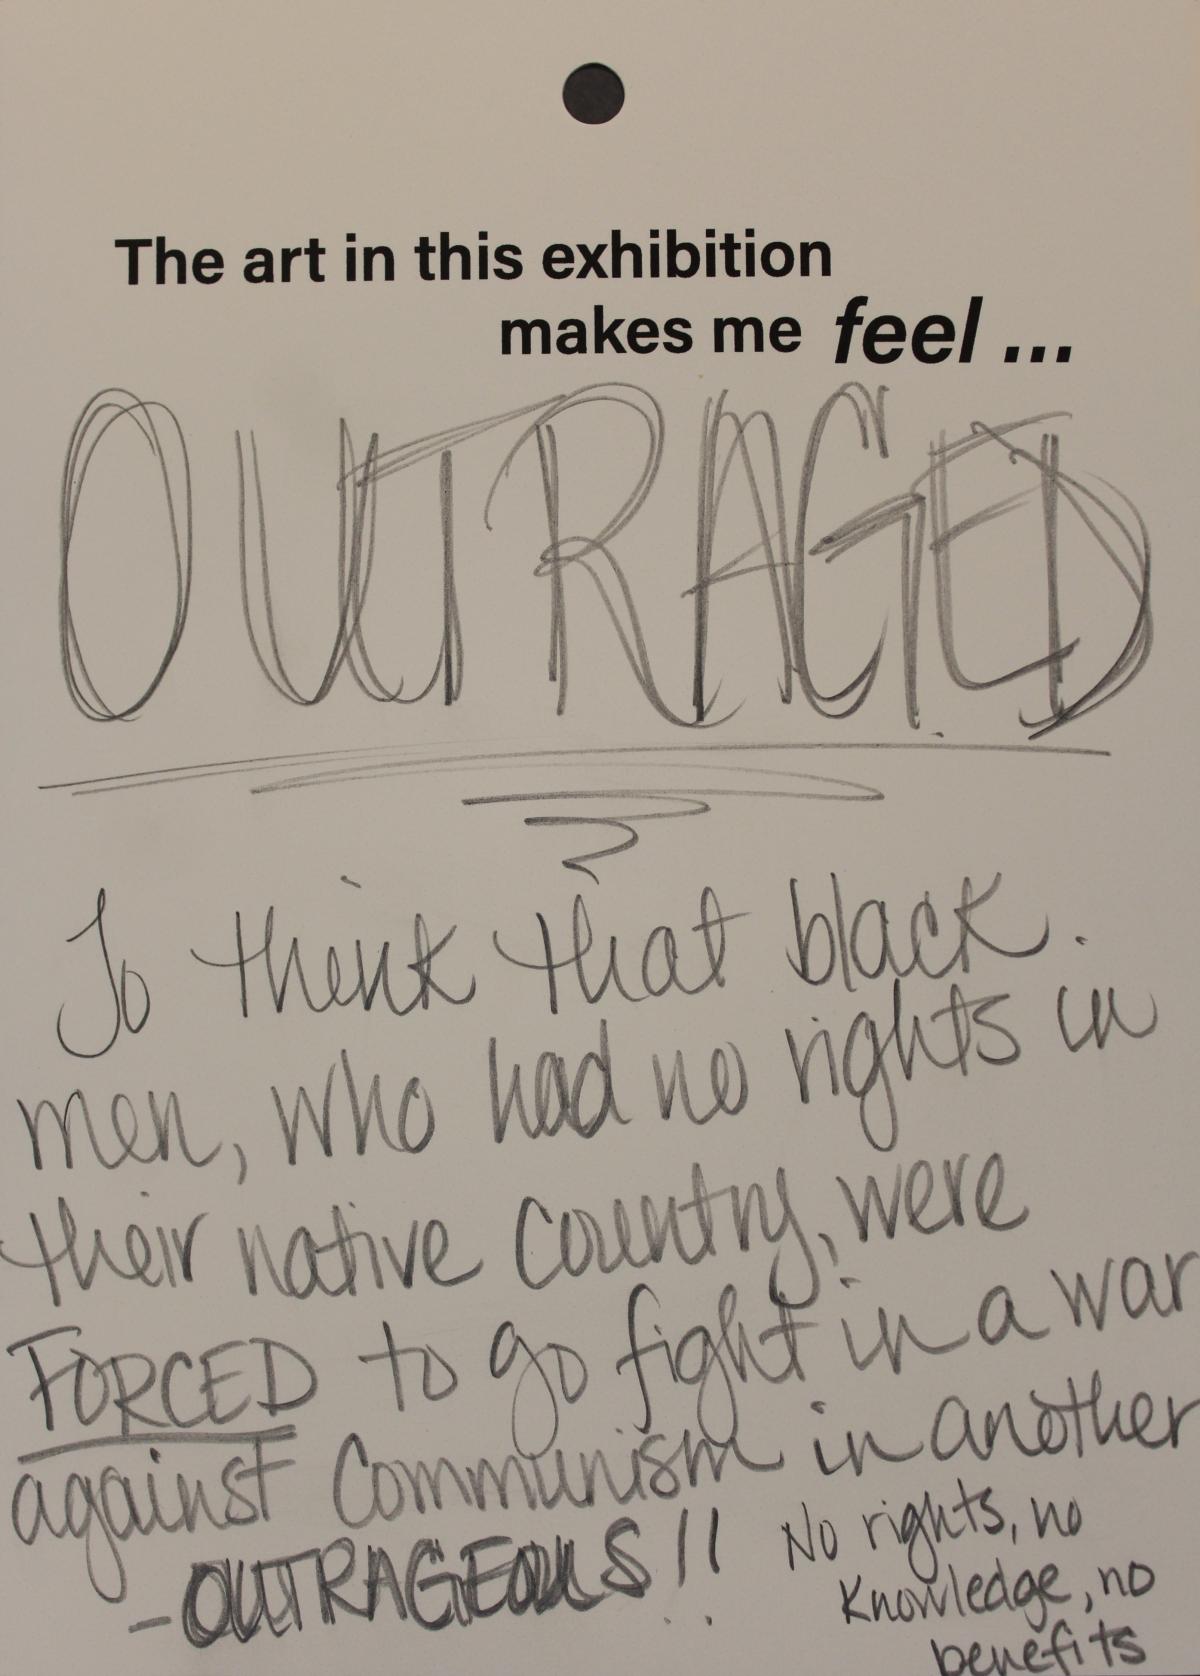 A visitor comment card describing outrage over the Vietnam War